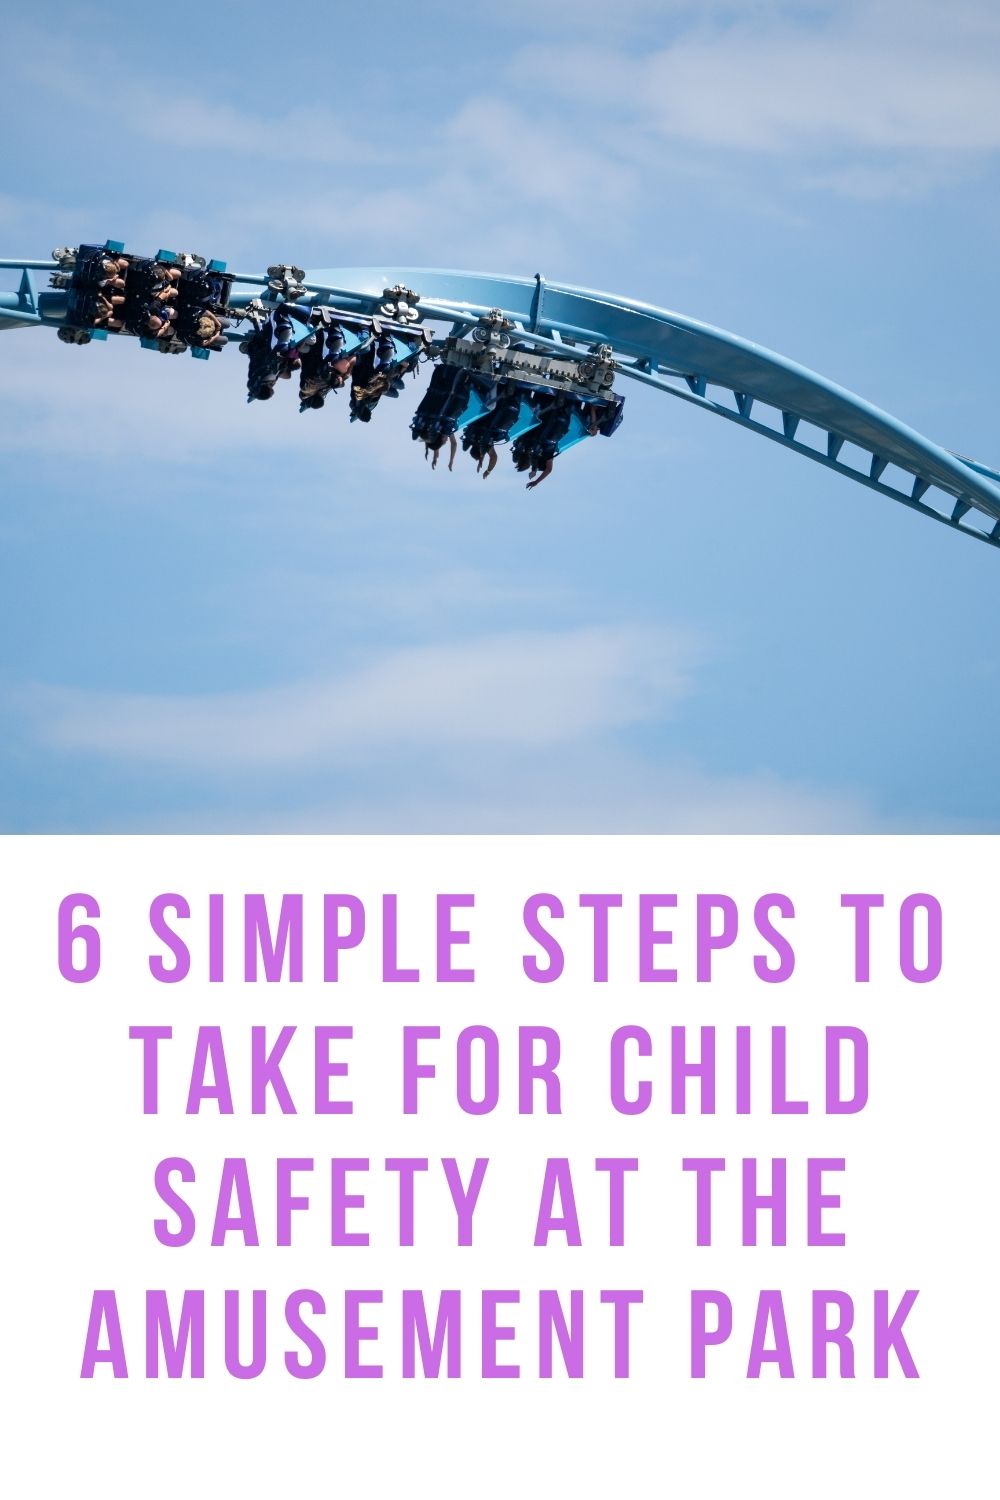 Child safety at the amusement park